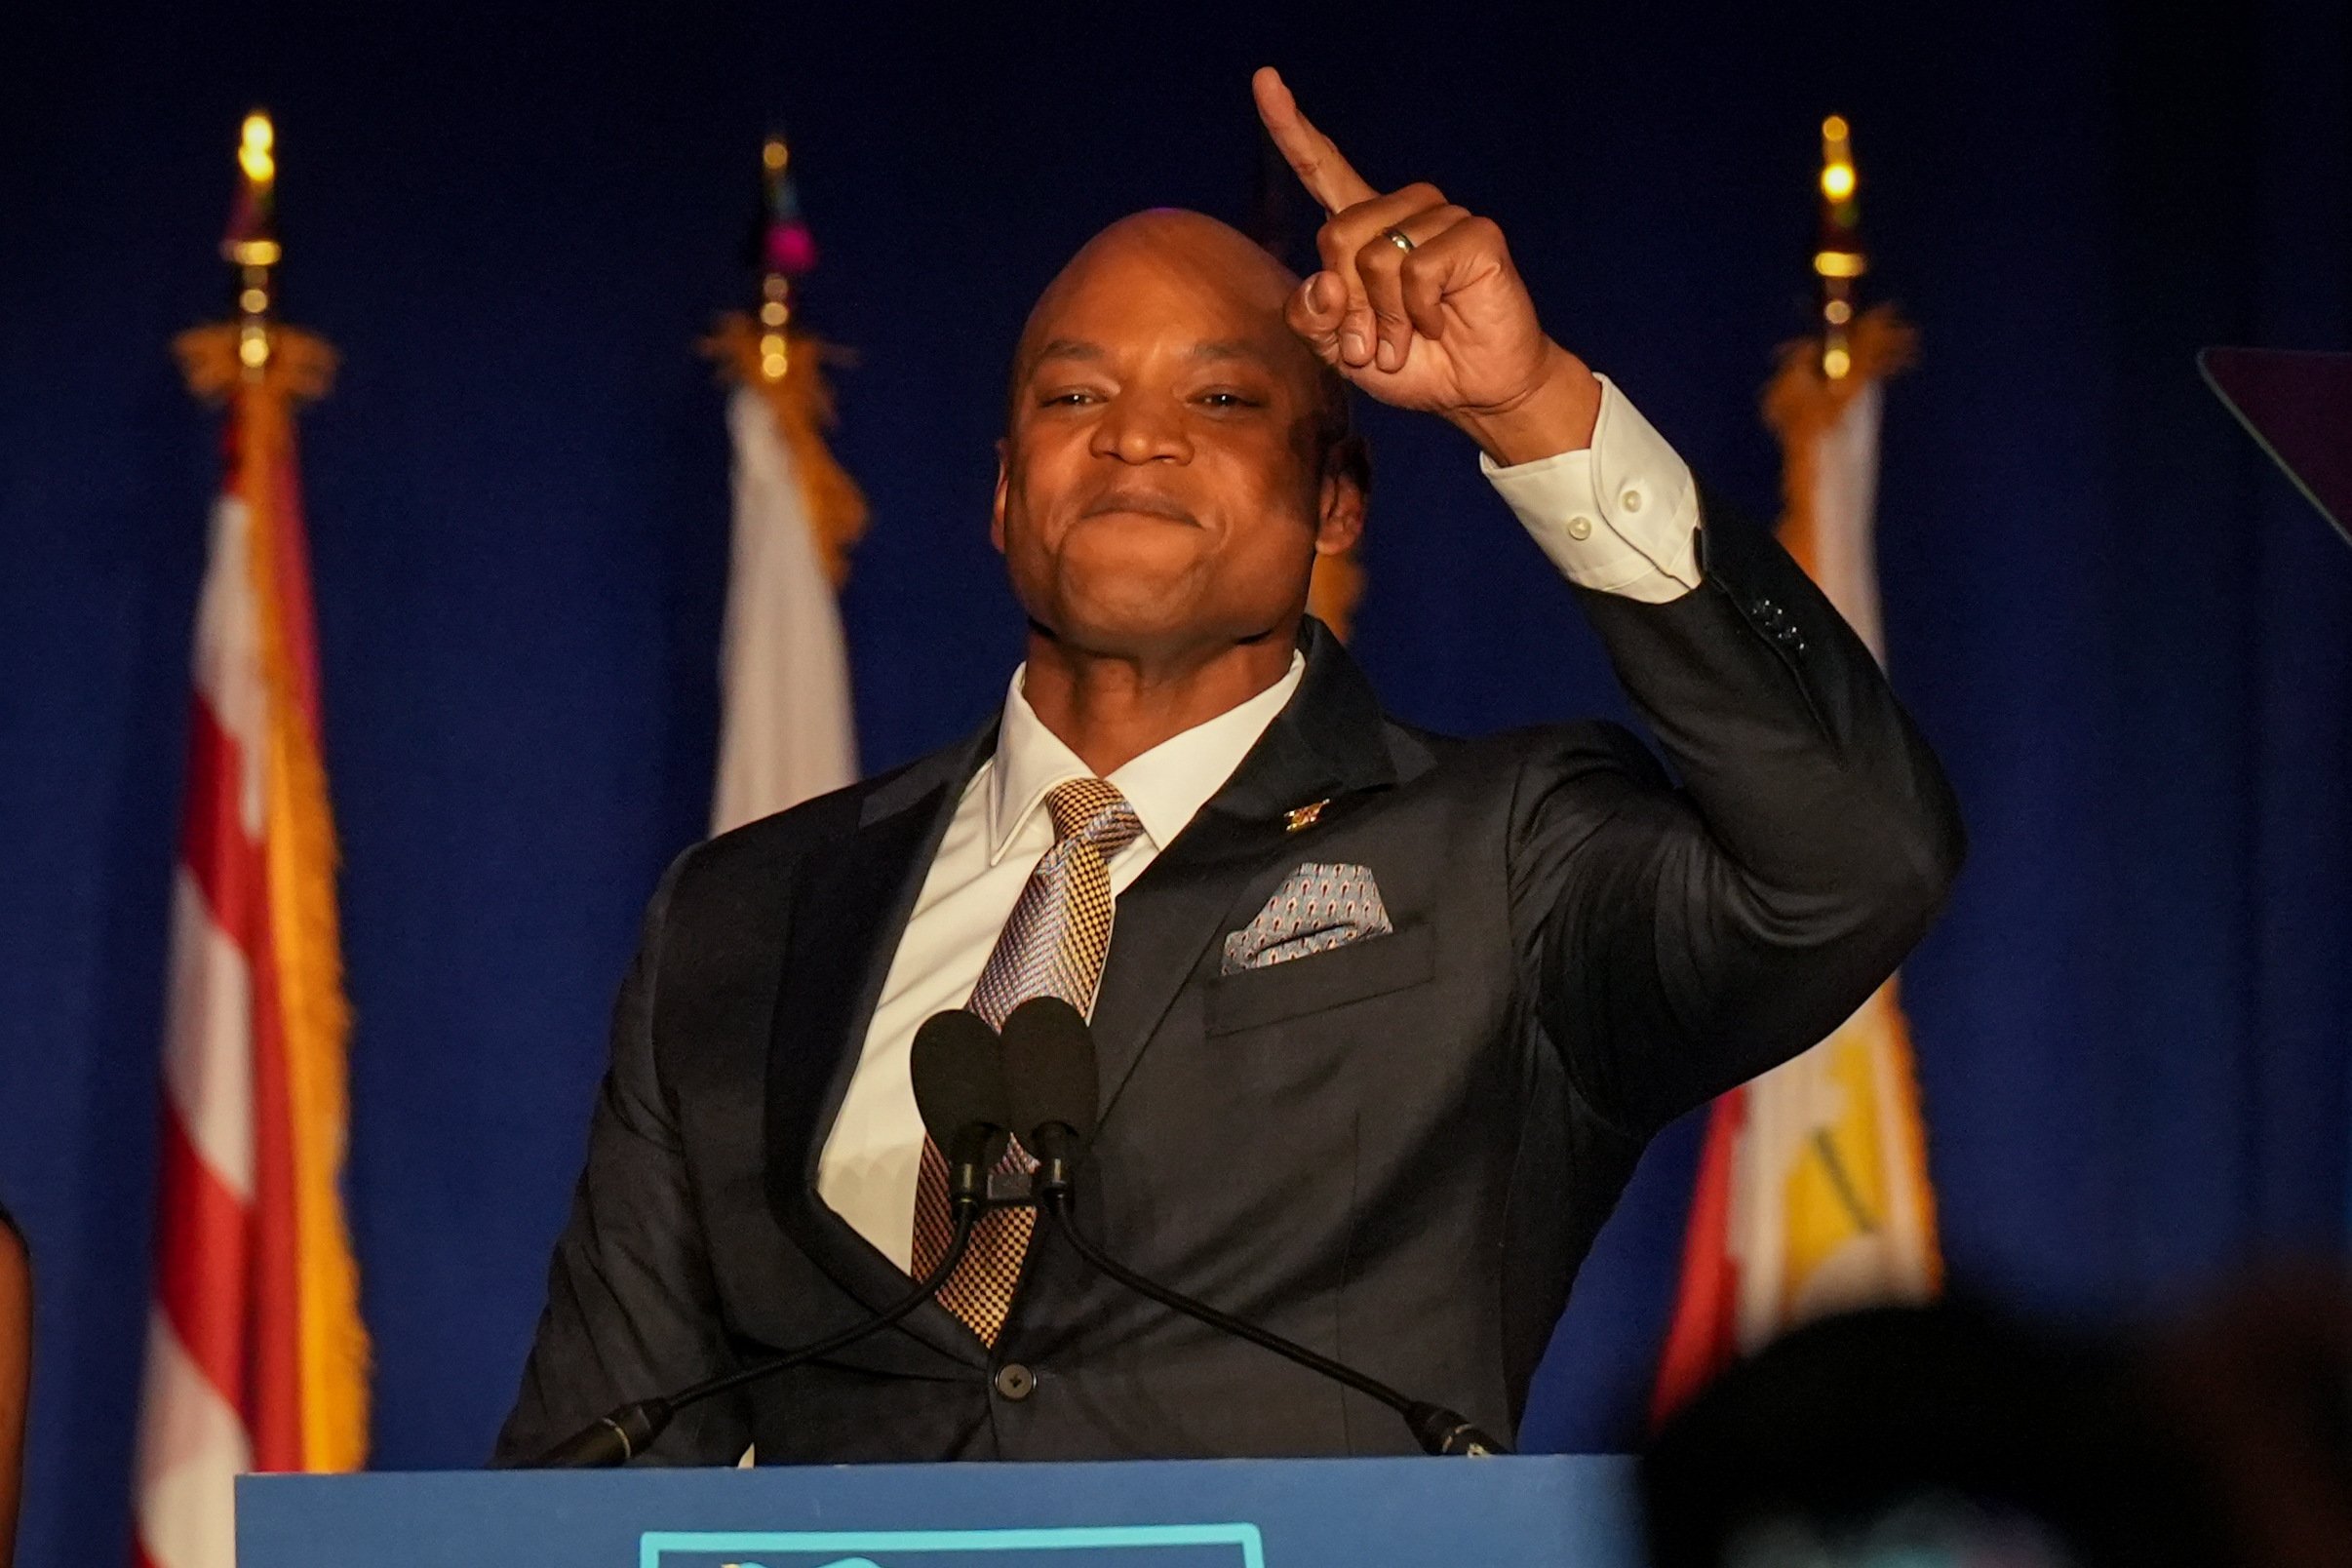 Maryland Gov. Wes Moore a 'guest splasher' during Orioles' Sunday night  game - CBS Baltimore